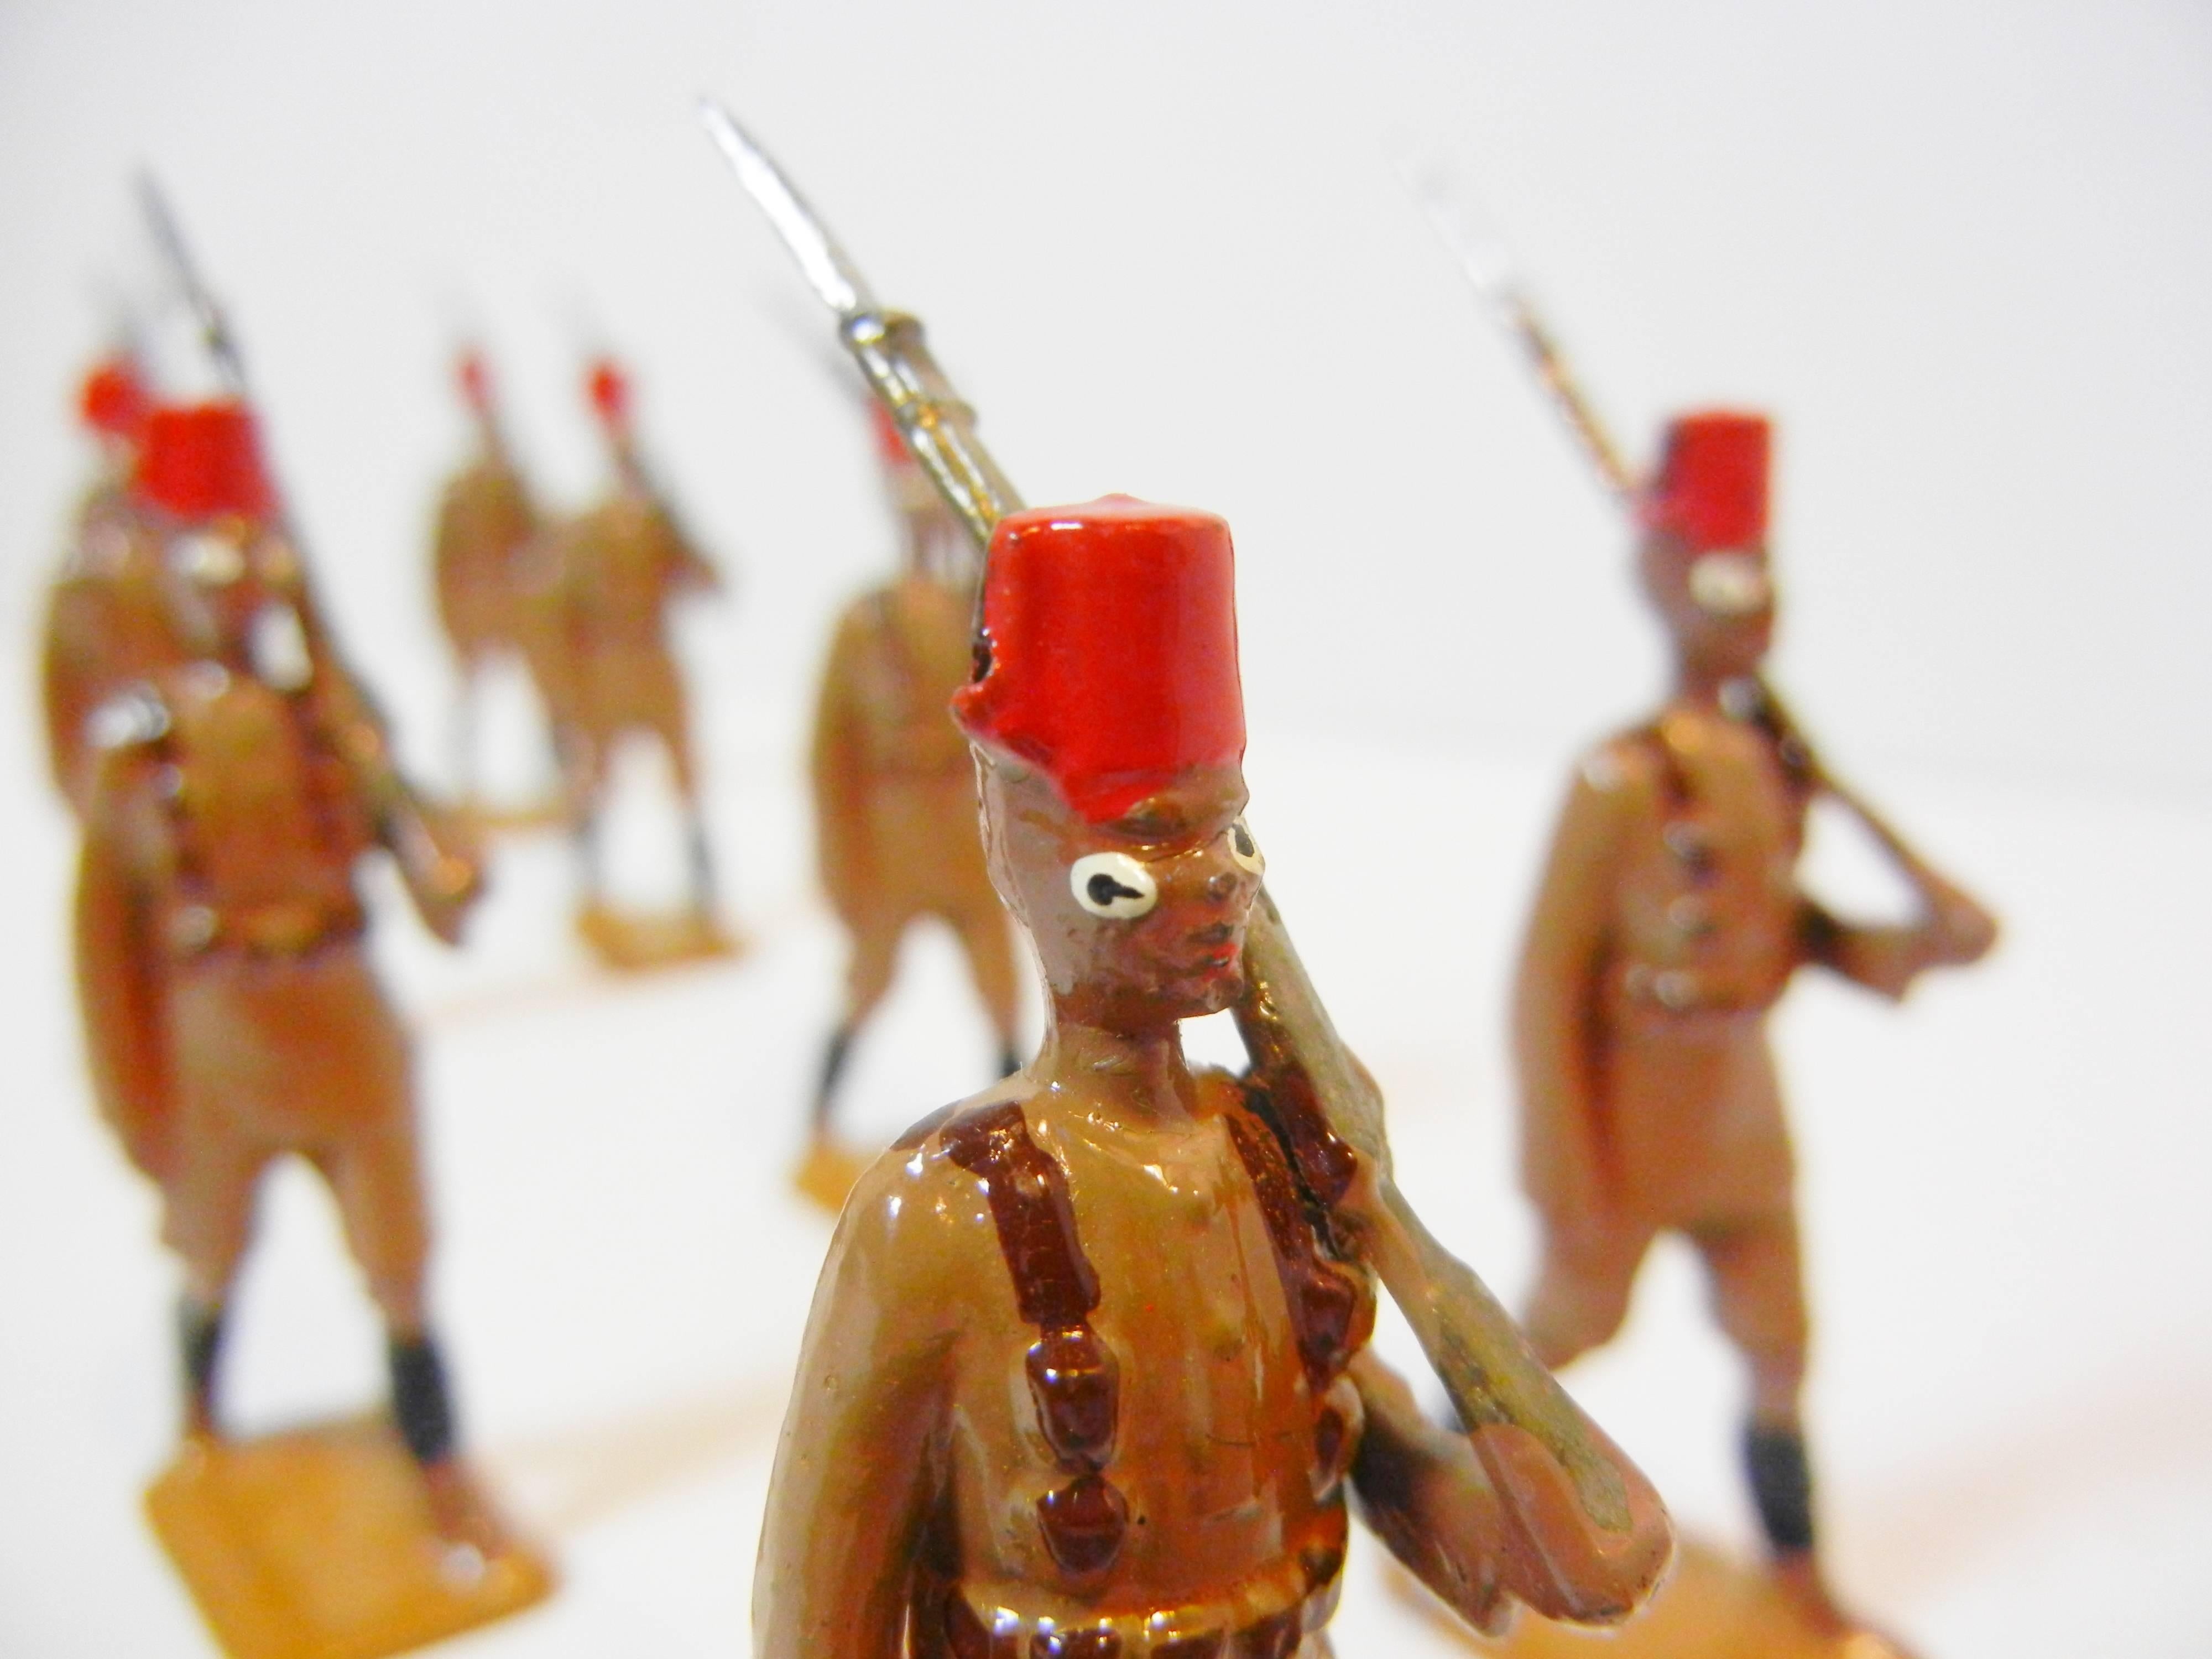 Molded King's African Rifles, Vintage Toy Soldiers by W. Britain Ltd